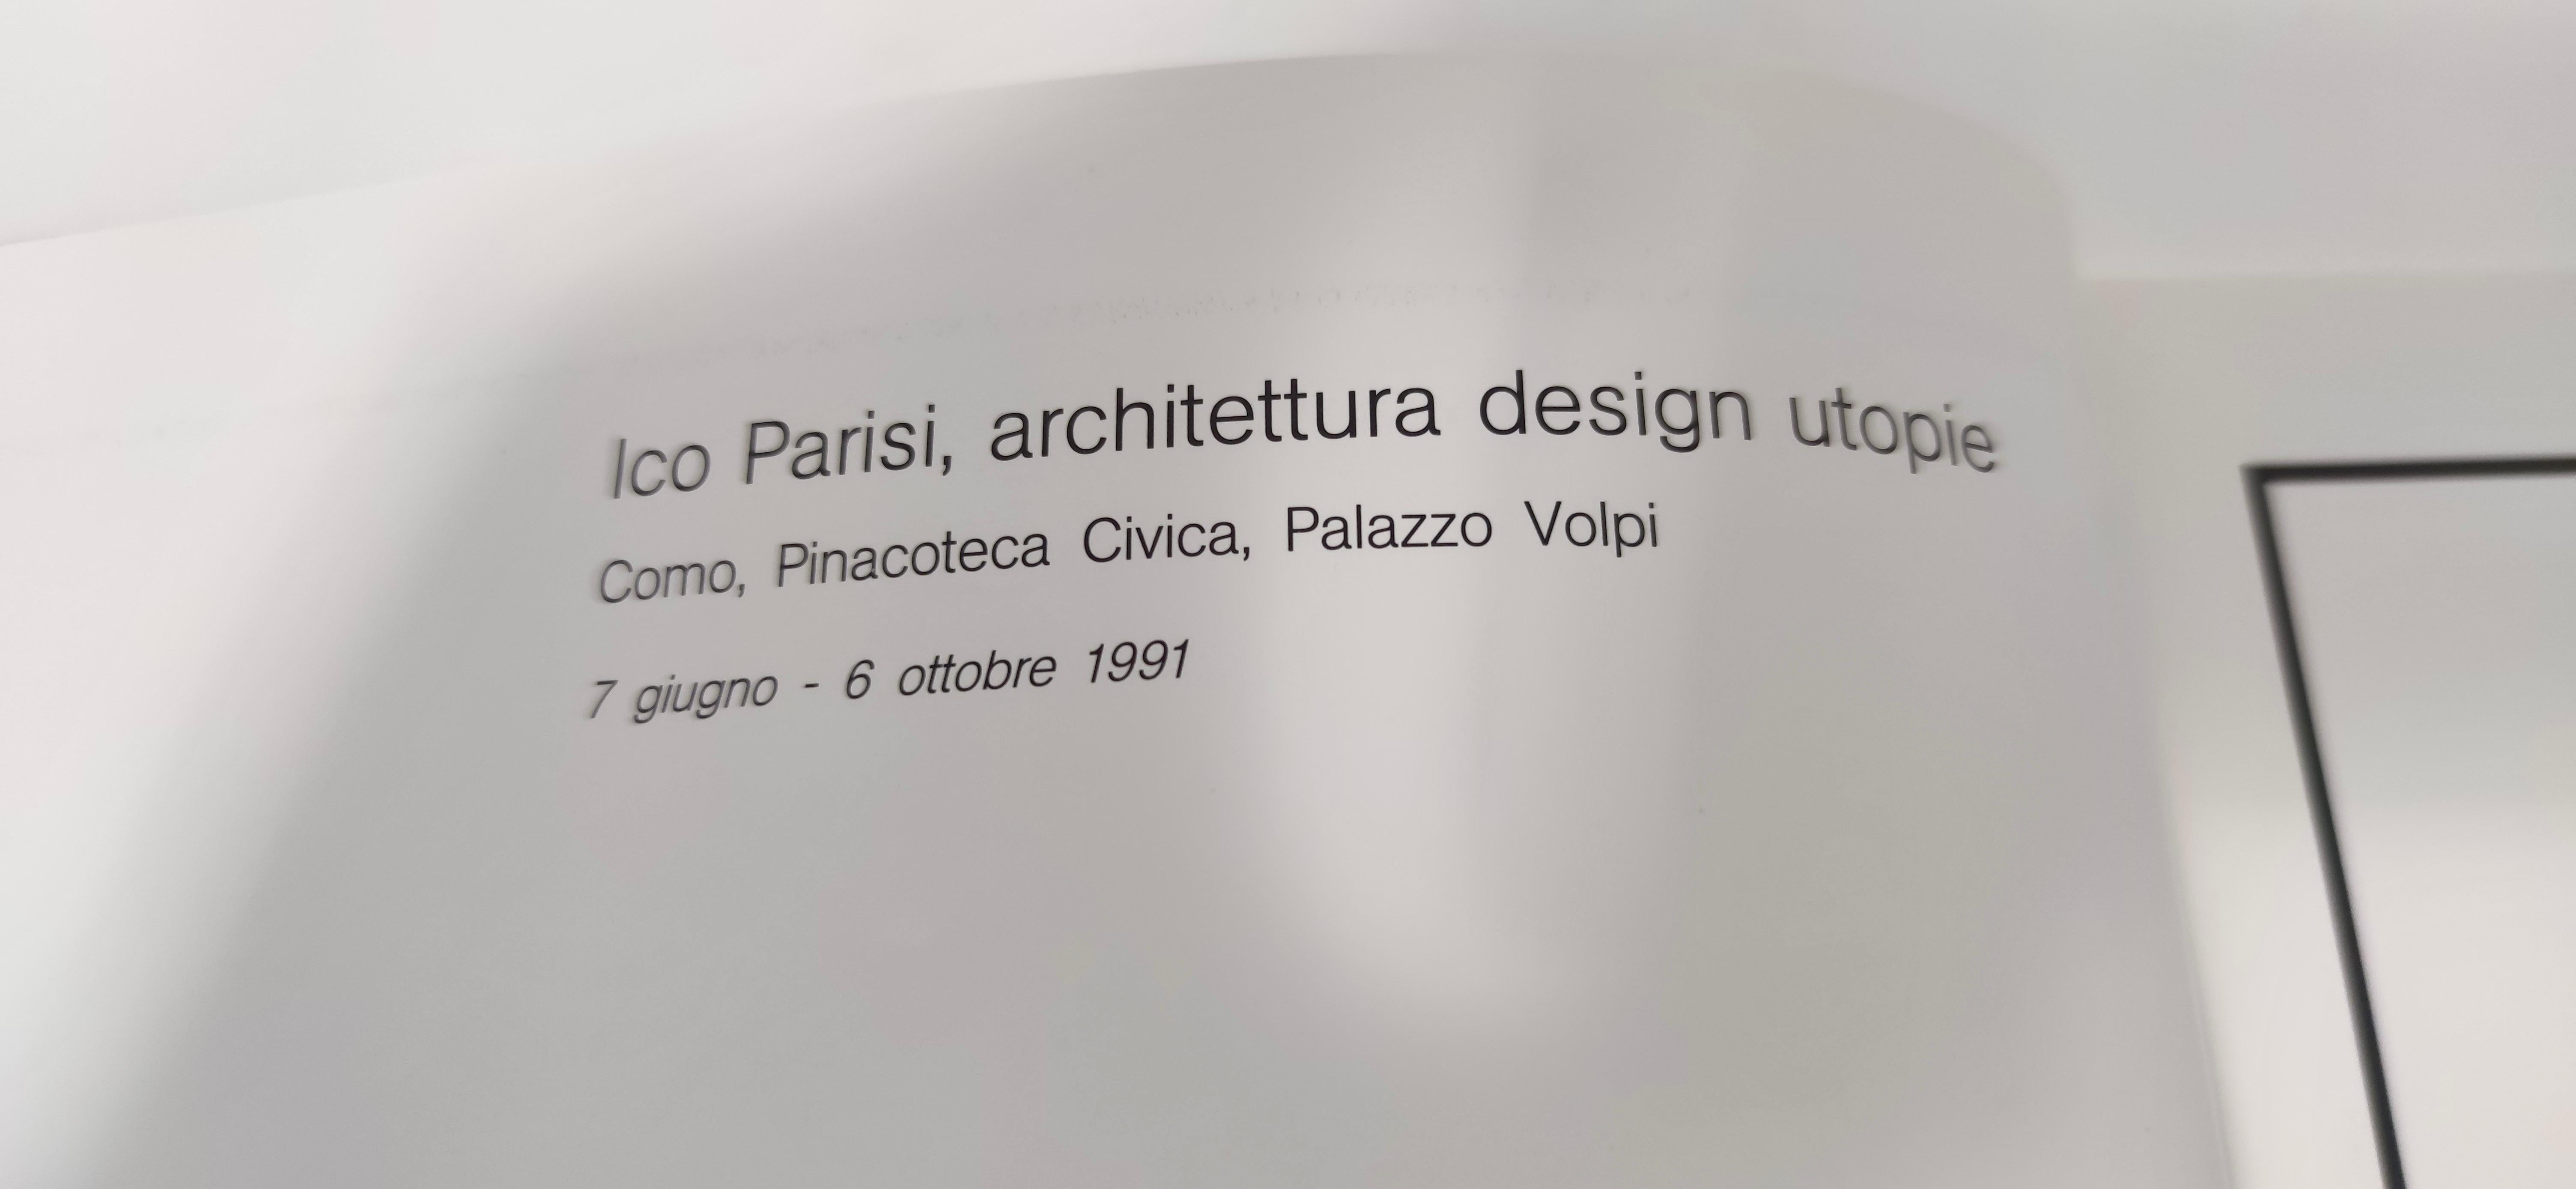 ISBN: 88.7269.004.8
This rare book on Ico Parisi by Luigi Cavadini and Flaminio Gualdoni has 86 pages with about 150 images. 
It is edited by FIdia Edizioni d'Arte and printed by Grafiche Salin, Olgiate Comasco (CO) - Italy on May 31st,